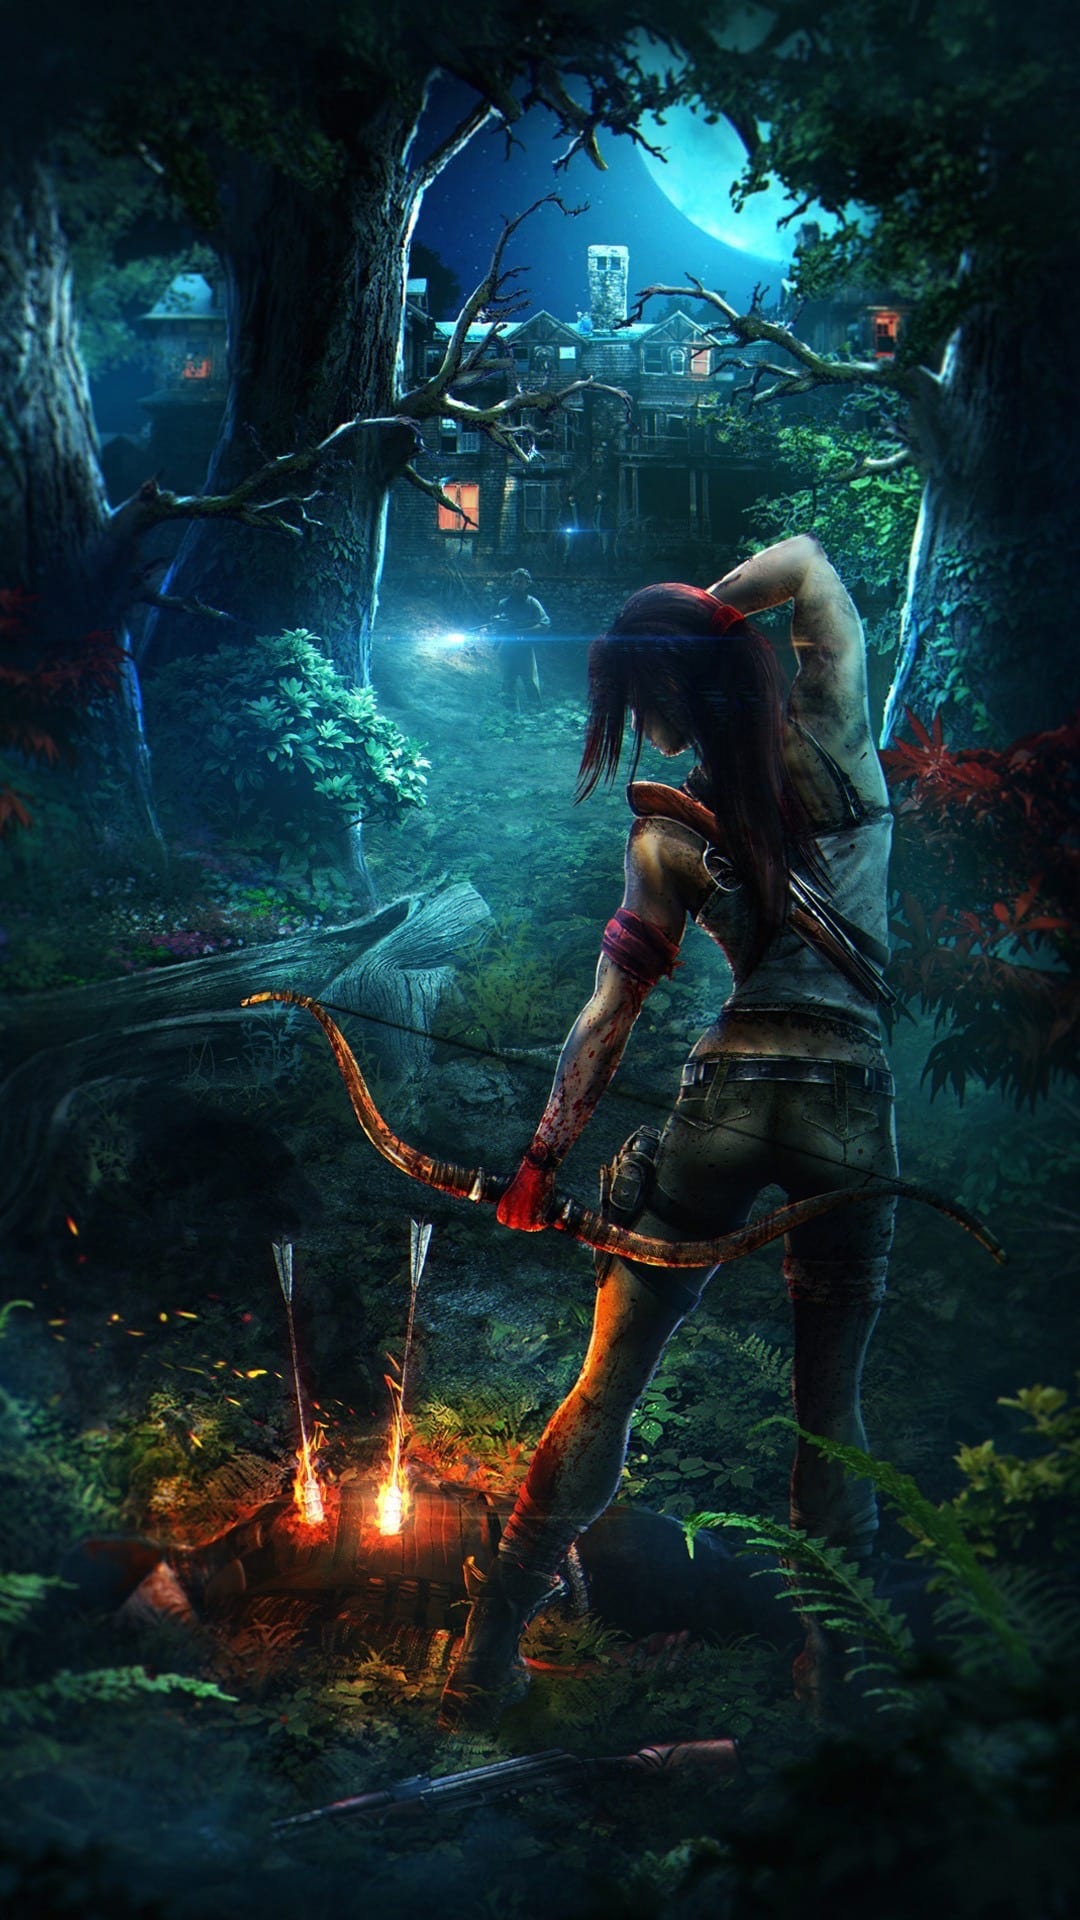 gaming wallpapers for android,action adventure game,pc game,demon,darkness,cg artwork